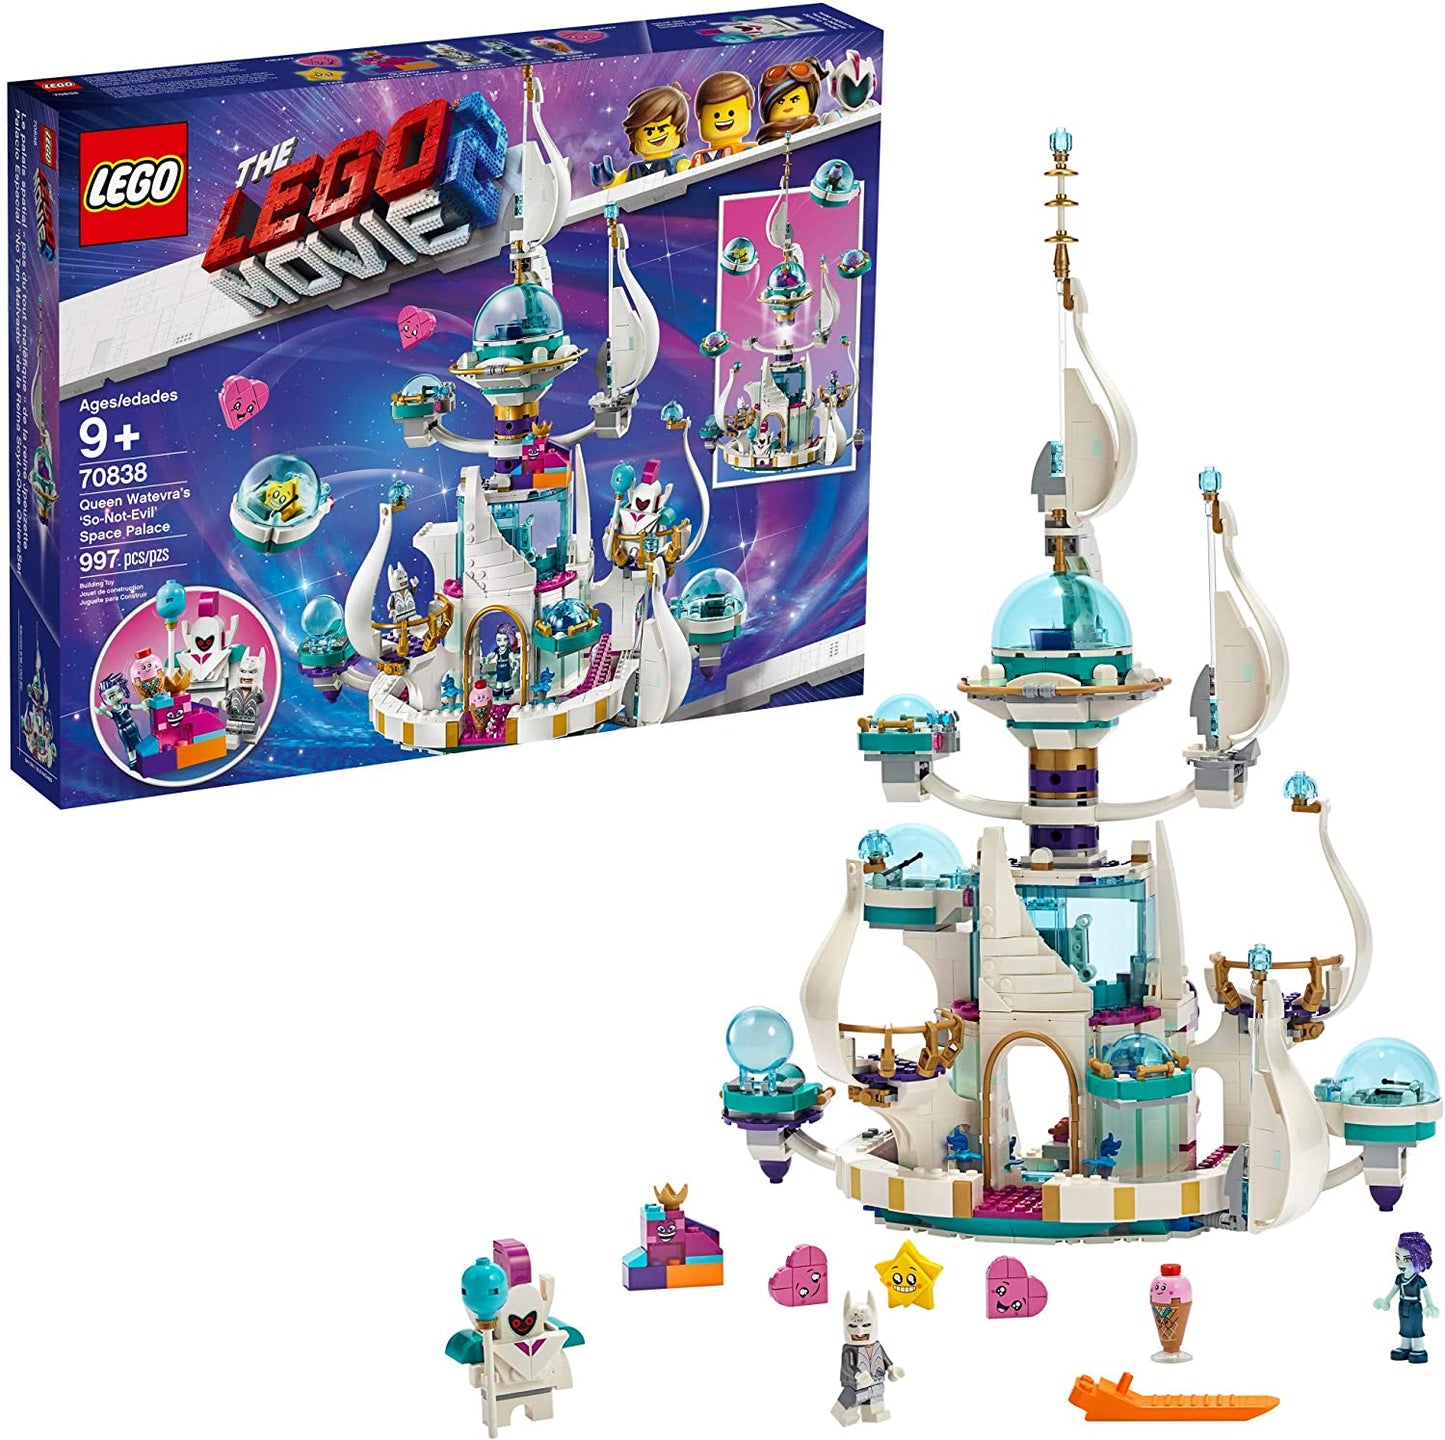 LEGO The Movie 2 Queen Watevra’s ‘So-Not-Evil’ Space Palace 70838 Building Kit (995 Pieces)